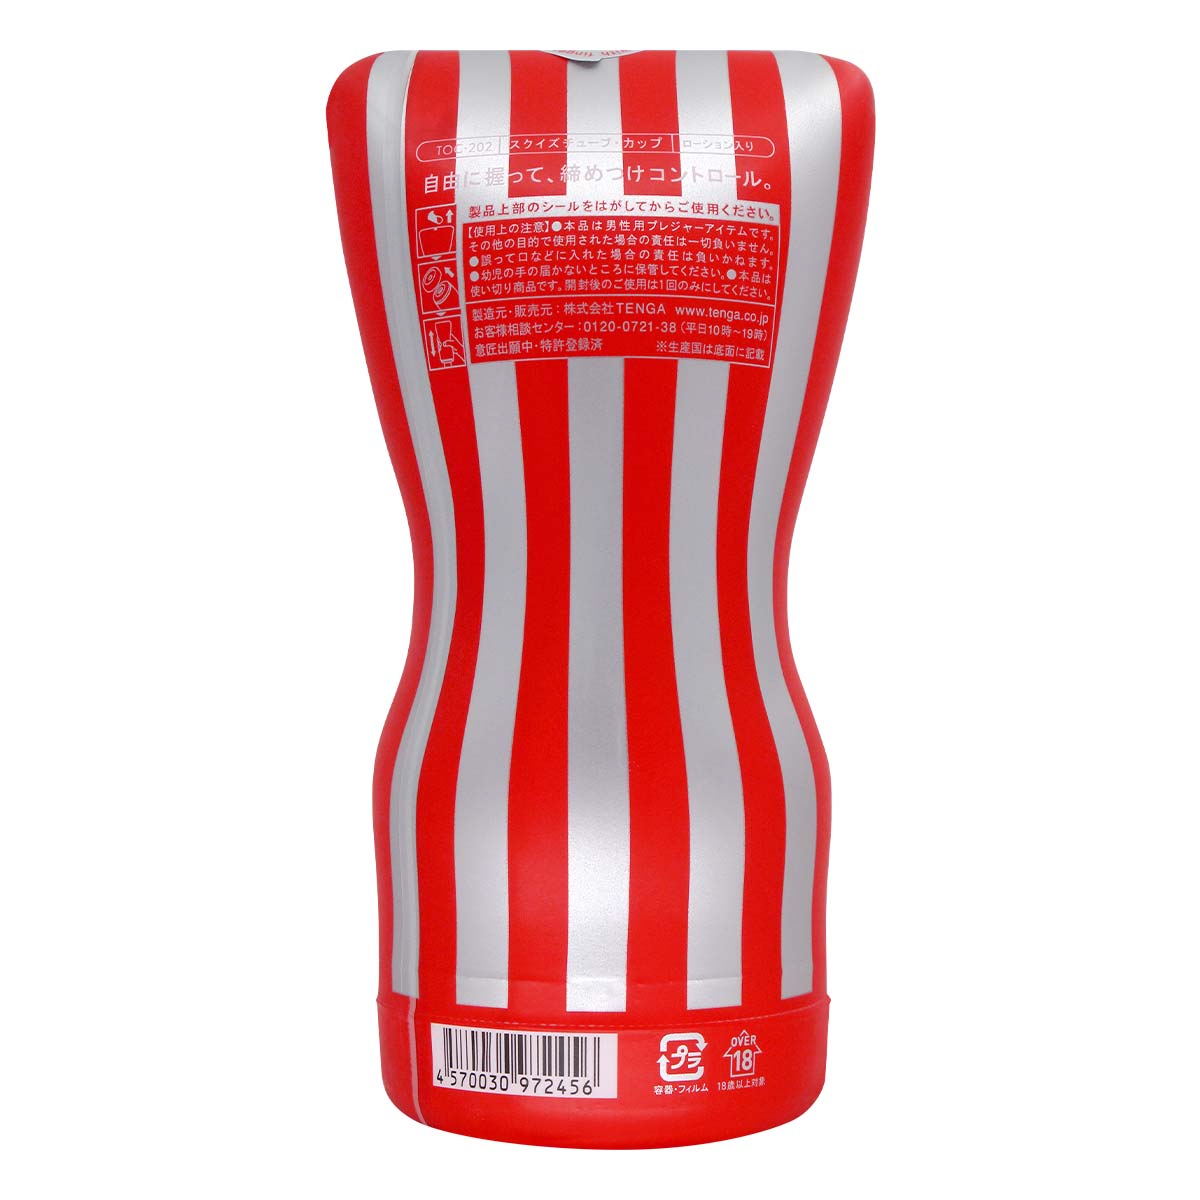 TENGA SQUEEZE TUBE CUP 2nd Generation-p_3